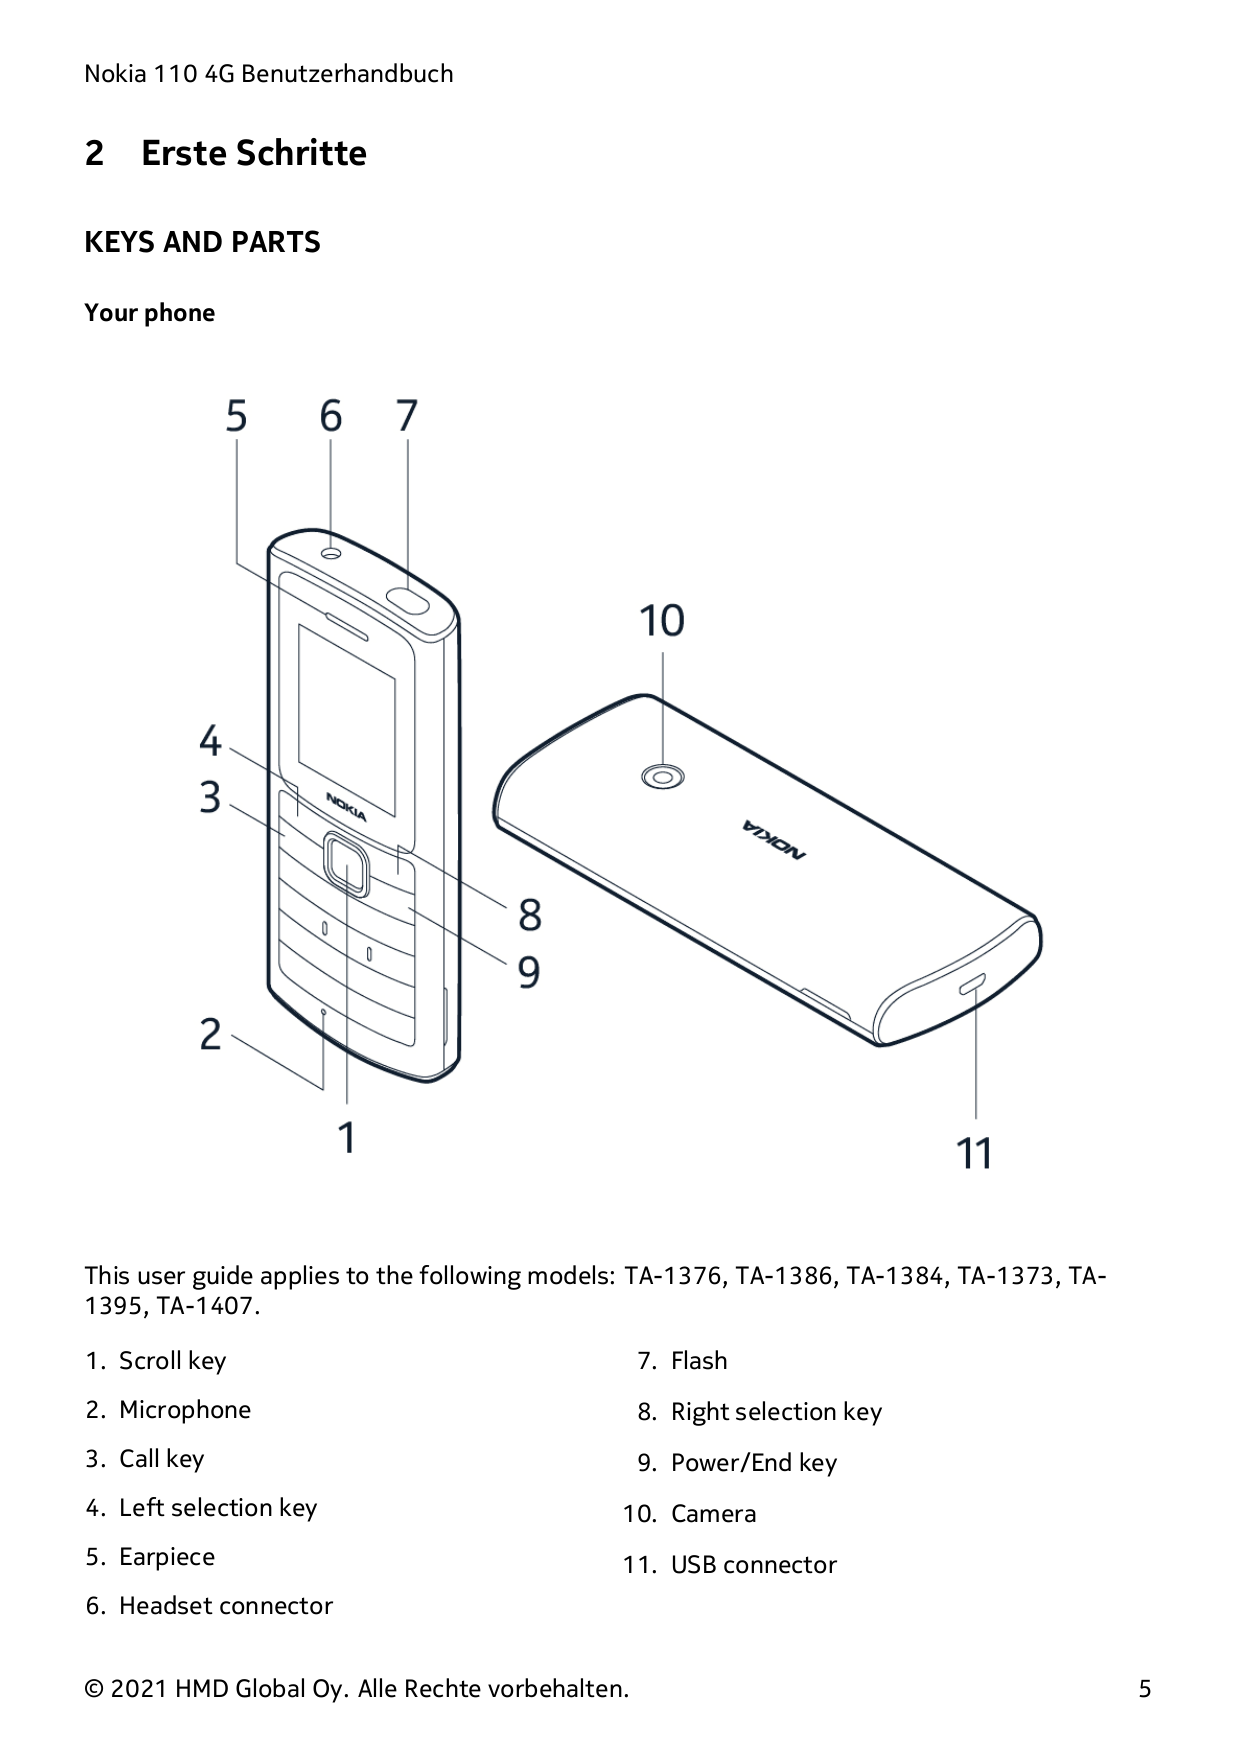 Nokia 110 4G Benutzerhandbuch2Erste SchritteKEYS AND PARTSYour phoneThis user guide applies to the following models: TA-1376, TA